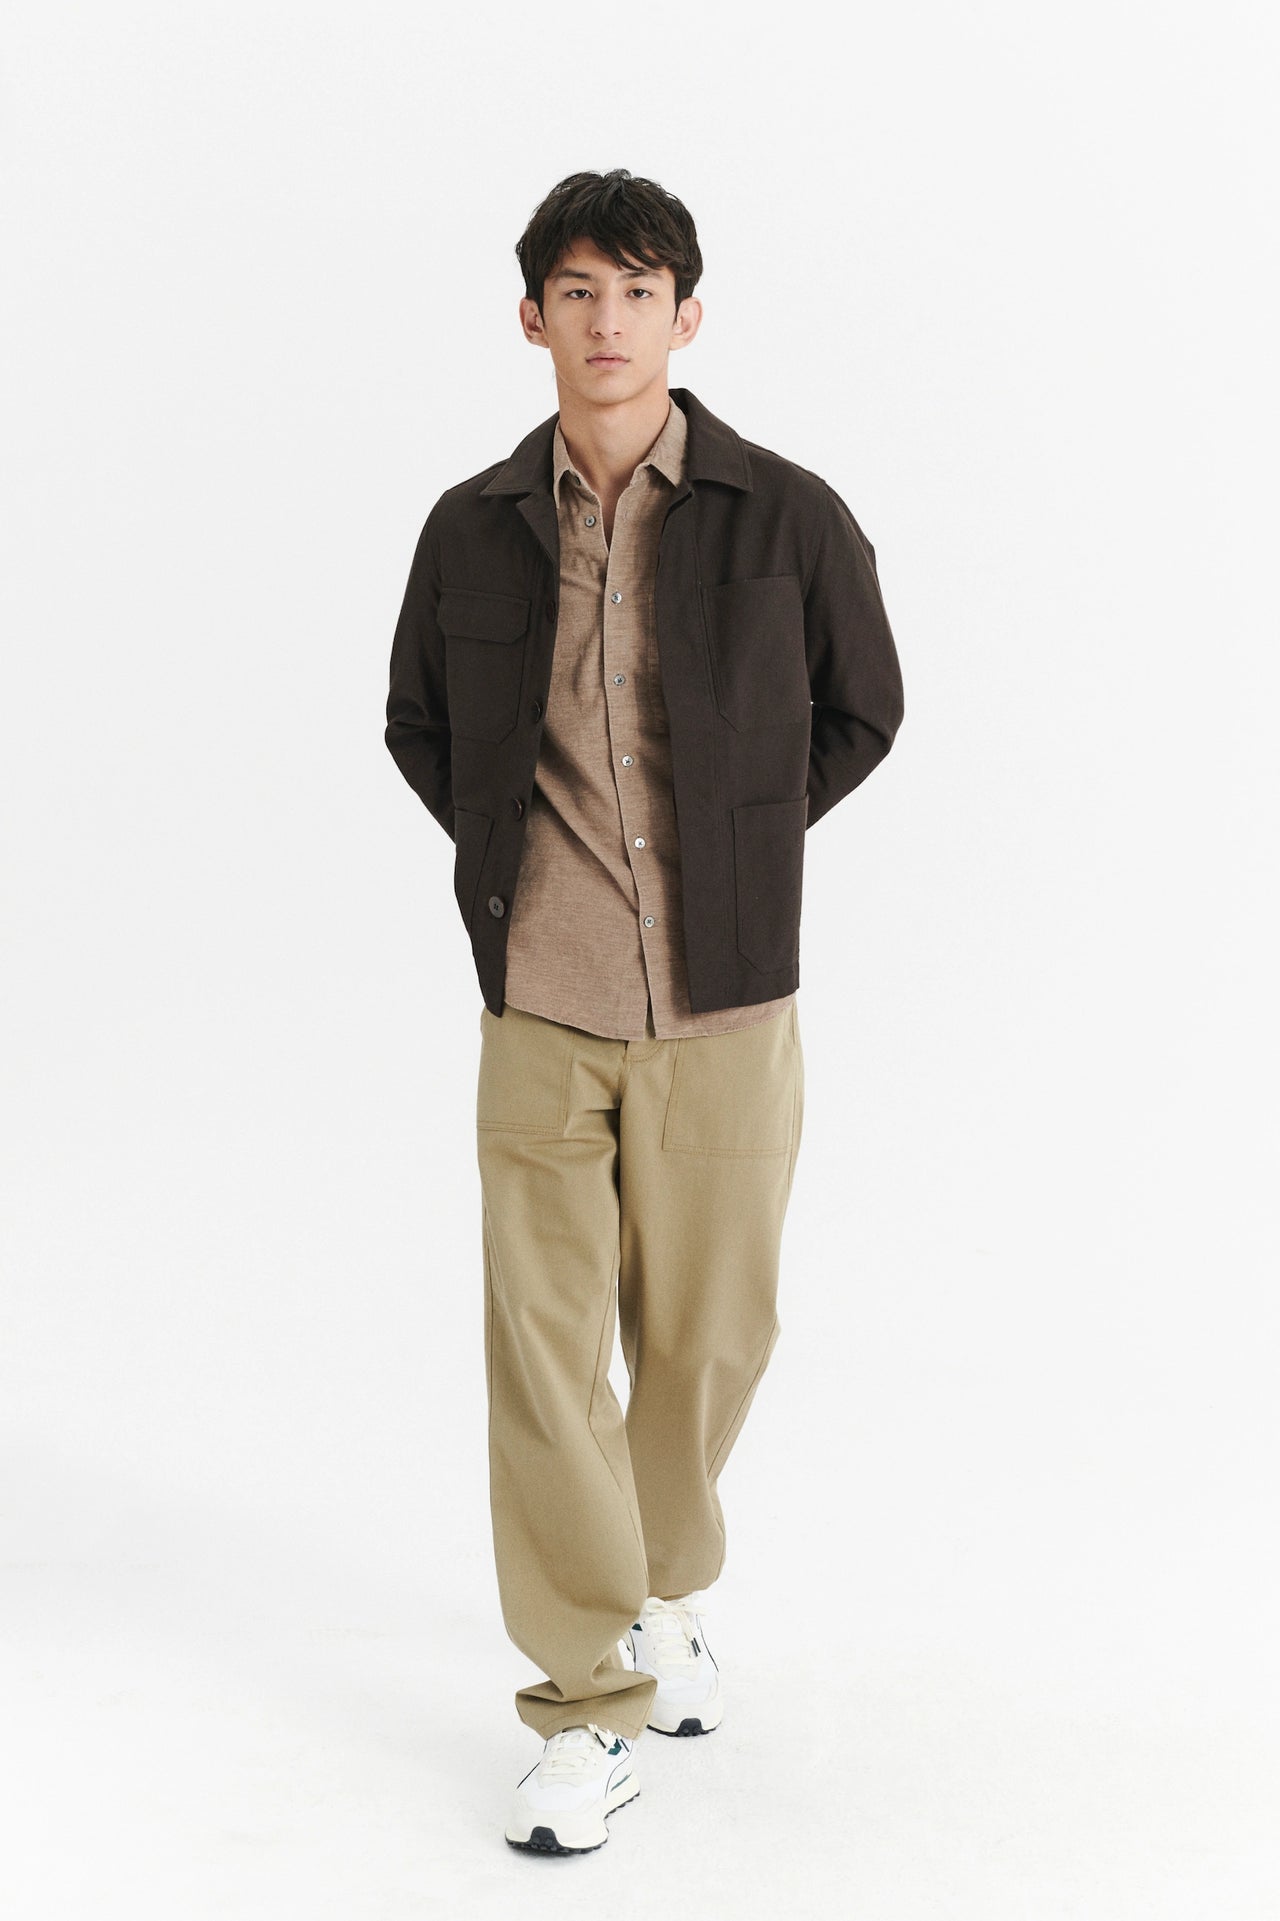 Workwear Jacket in the Finest Brown Italian Wool and Cotton